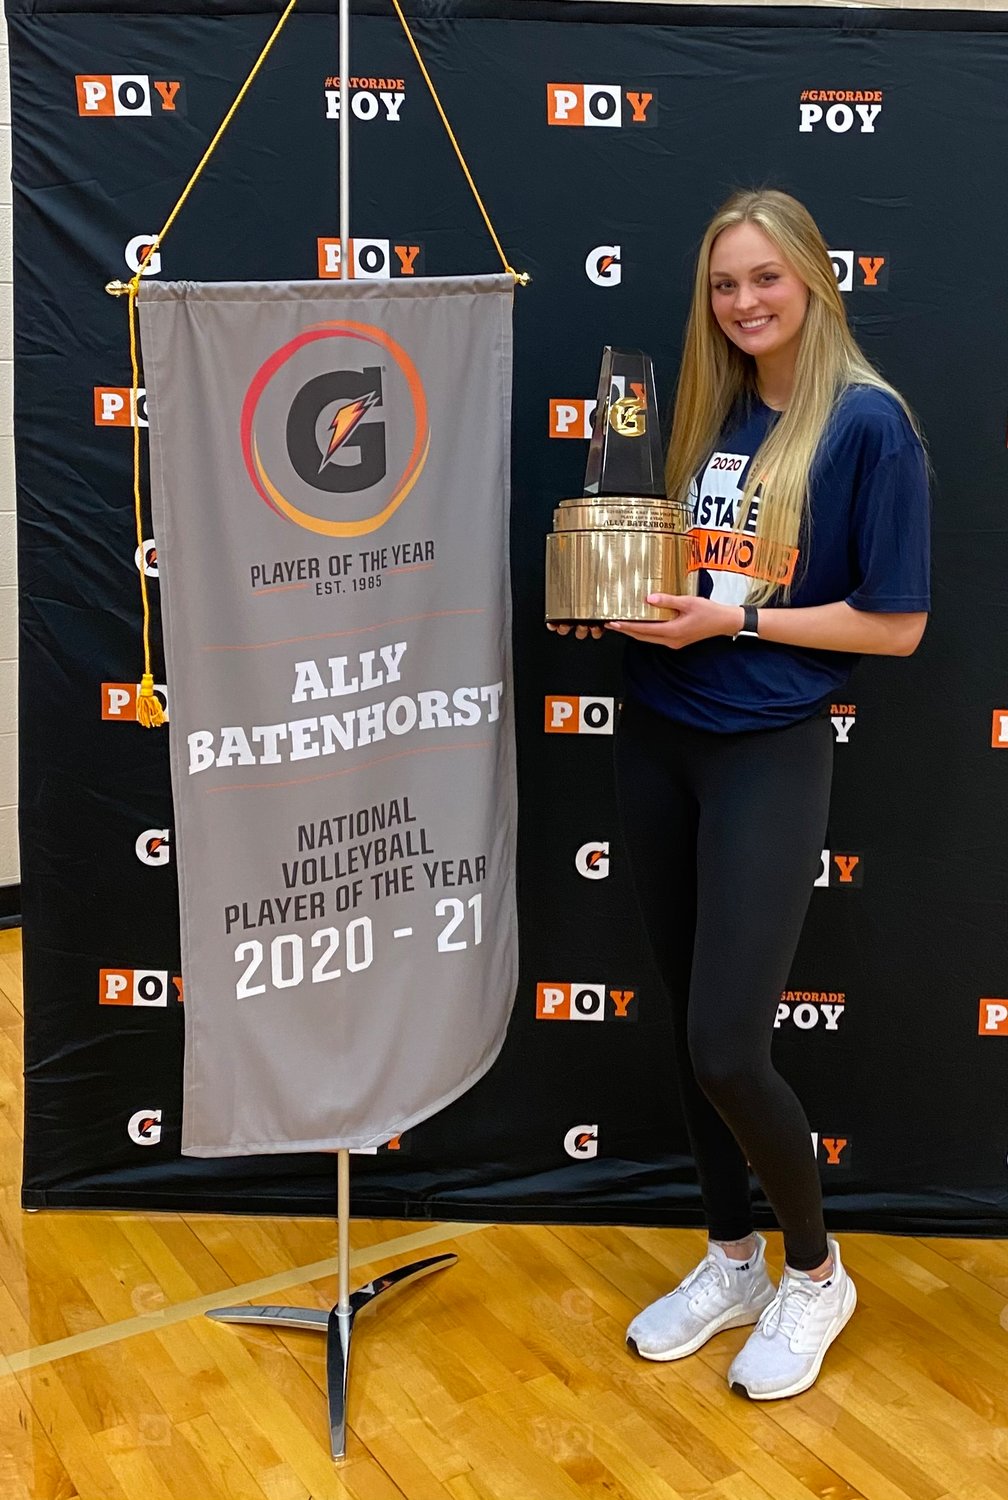 Former Seven Lakes star Ally Batenhorst poses for a photo with the 2020-21 Gatorade Volleyball National Player of the Year trophy that she was honored with on Wednesday at Seven Lakes High School.